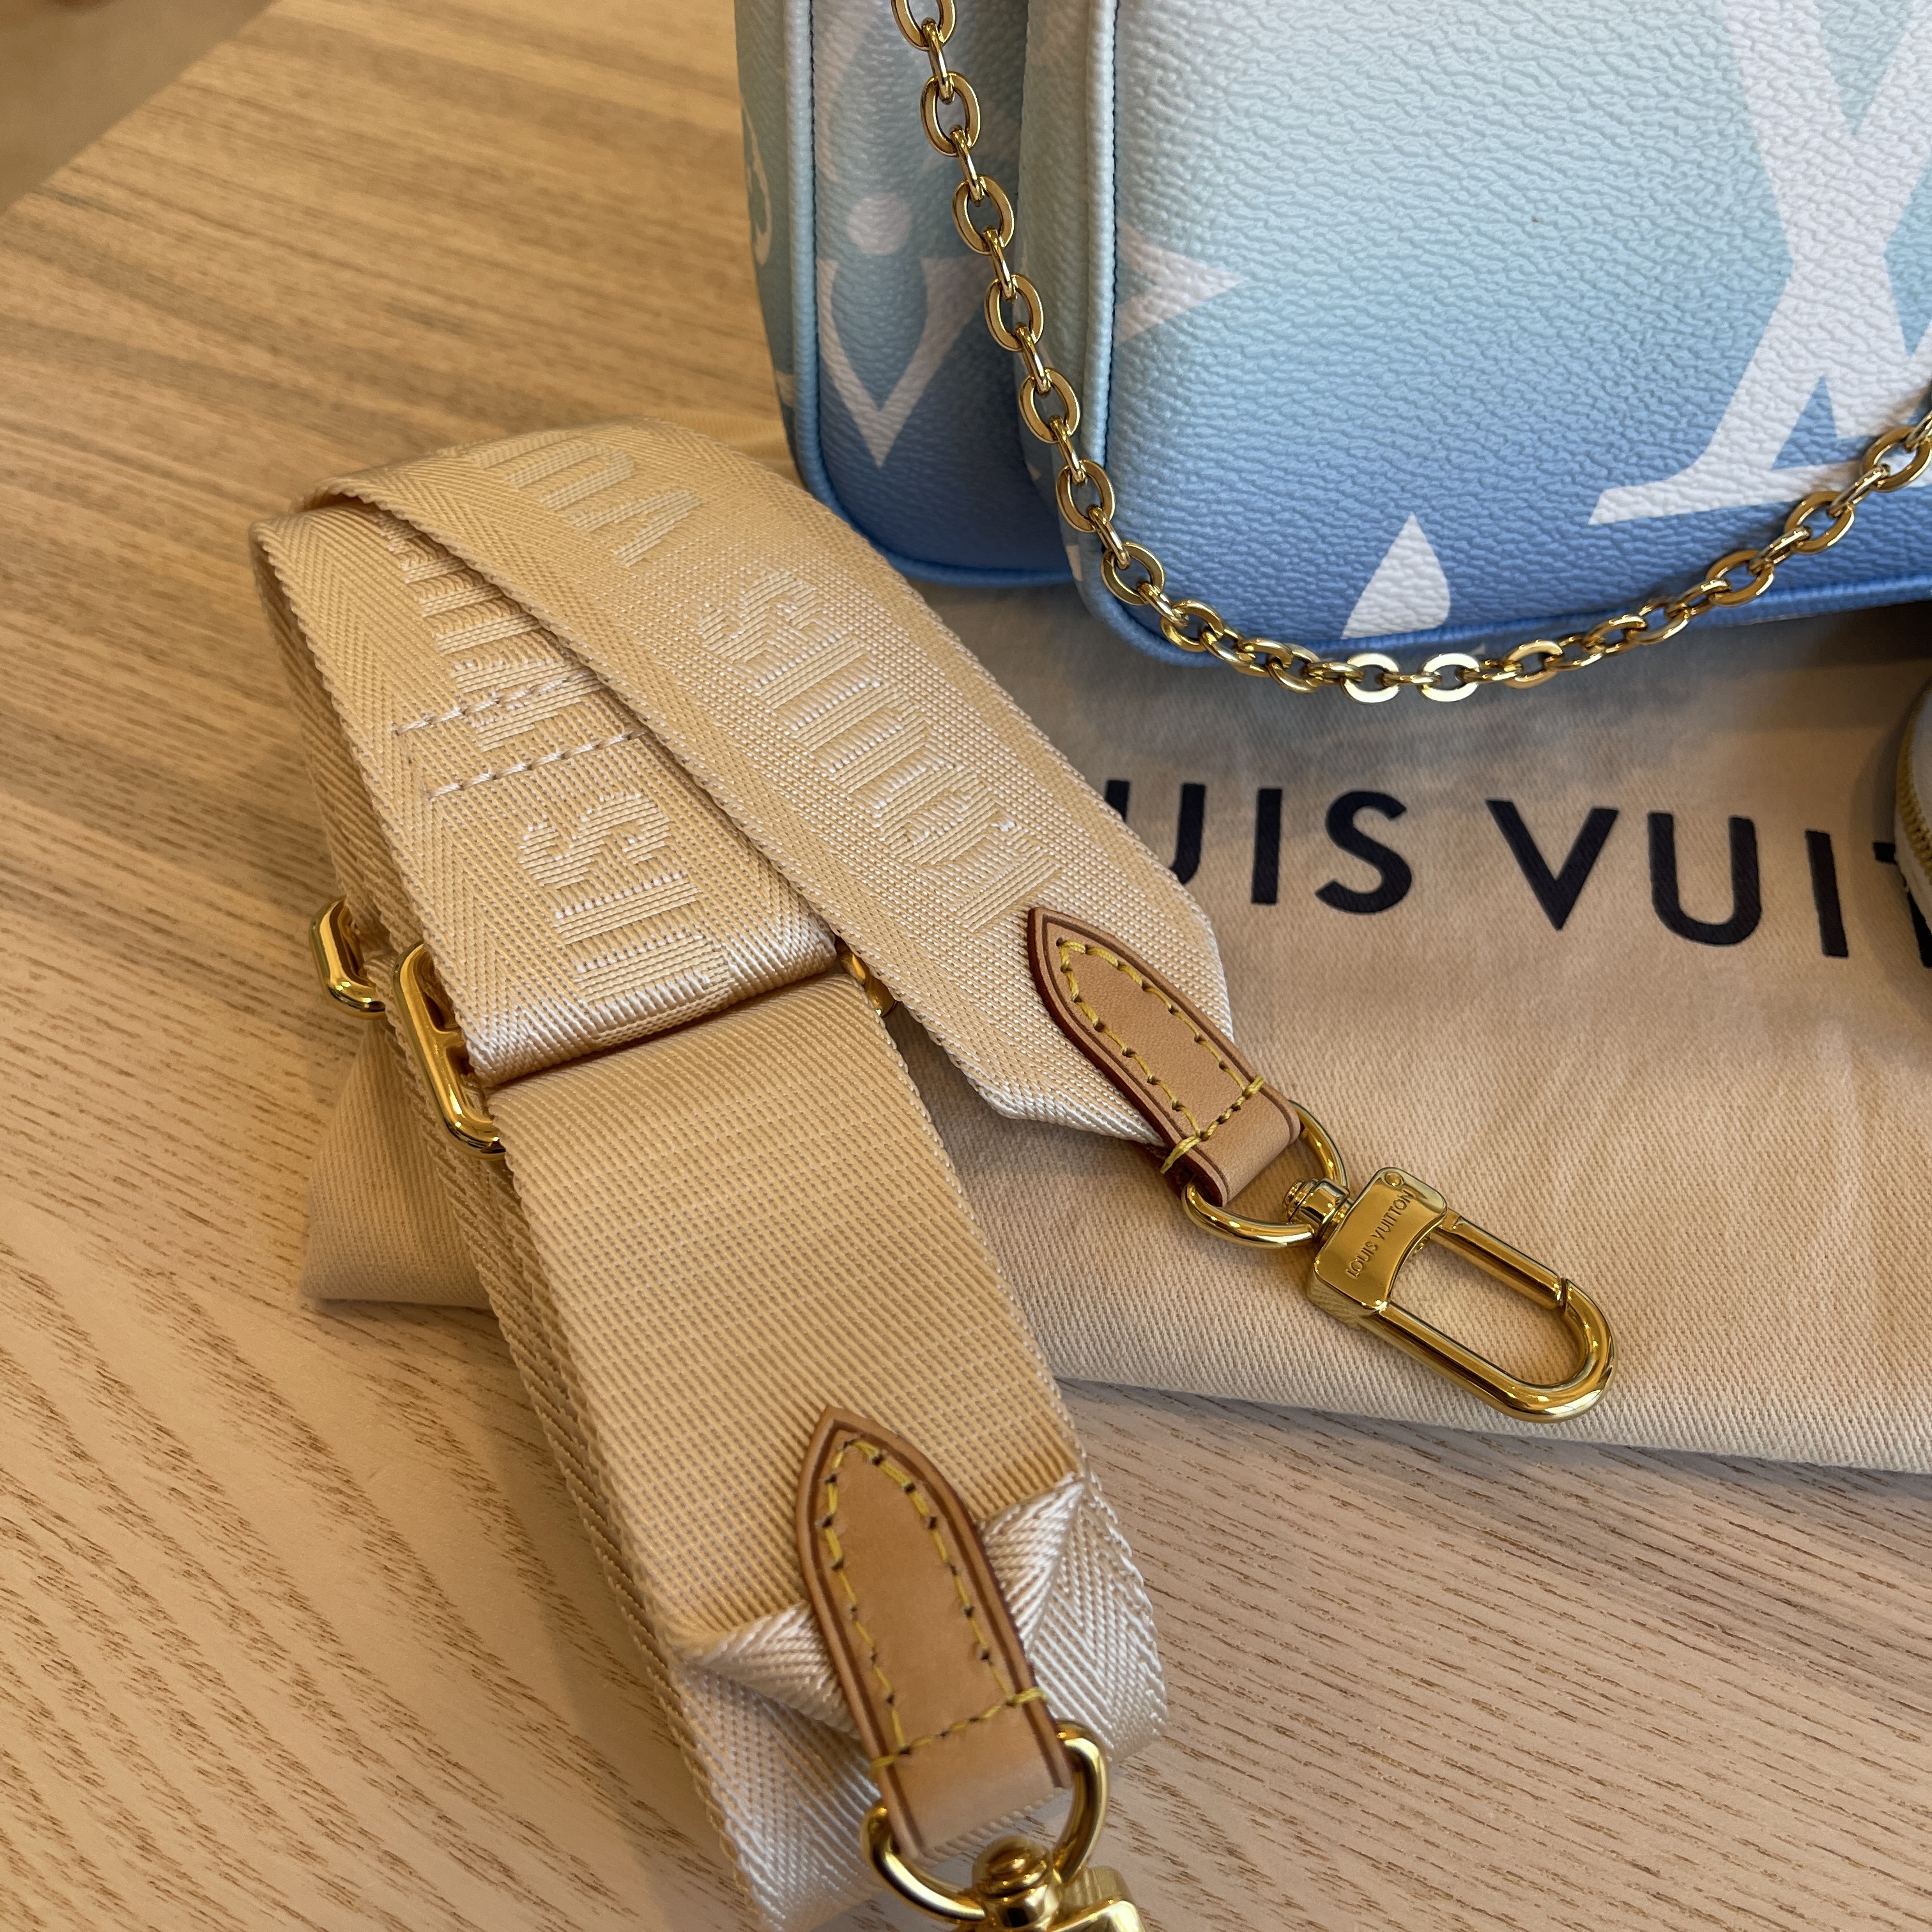 LOUIS VUITTON Monogram Giant By The Pool Multi Pochette Accessories Brume  1298814